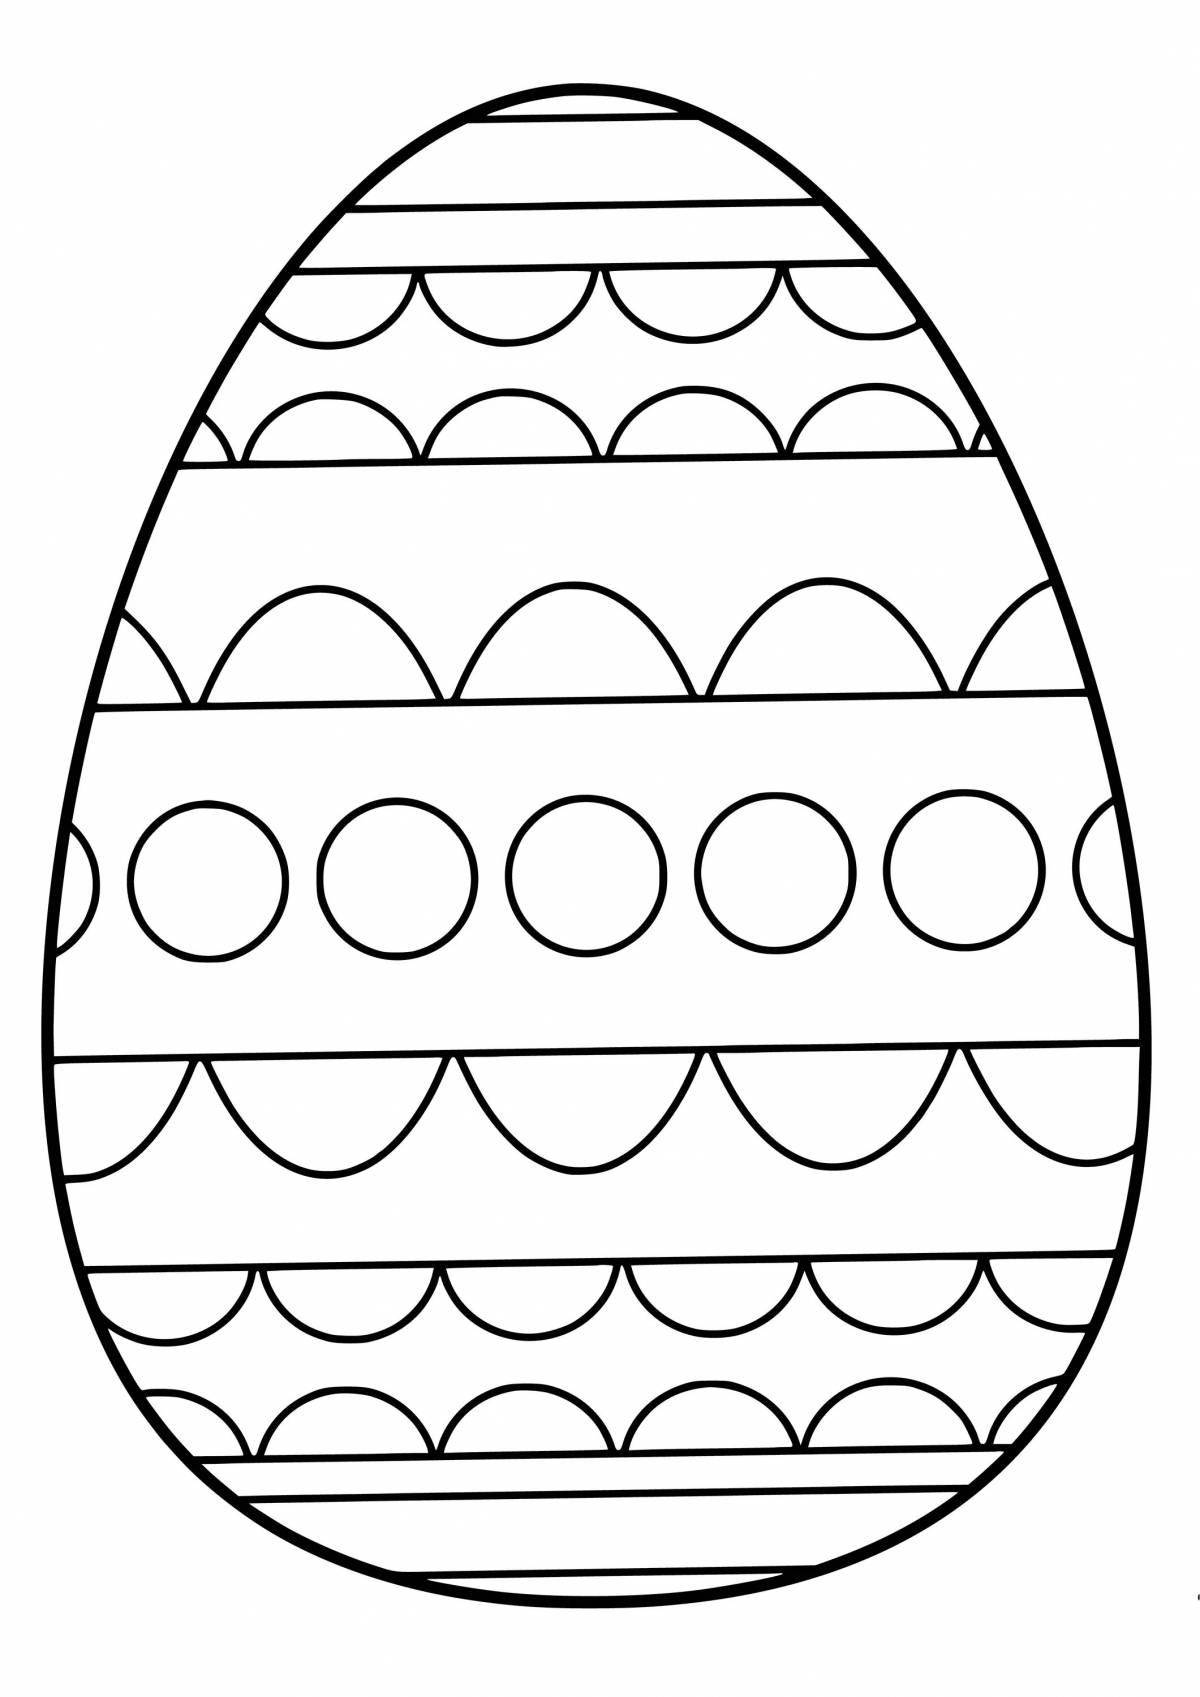 Amazing golden egg coloring book